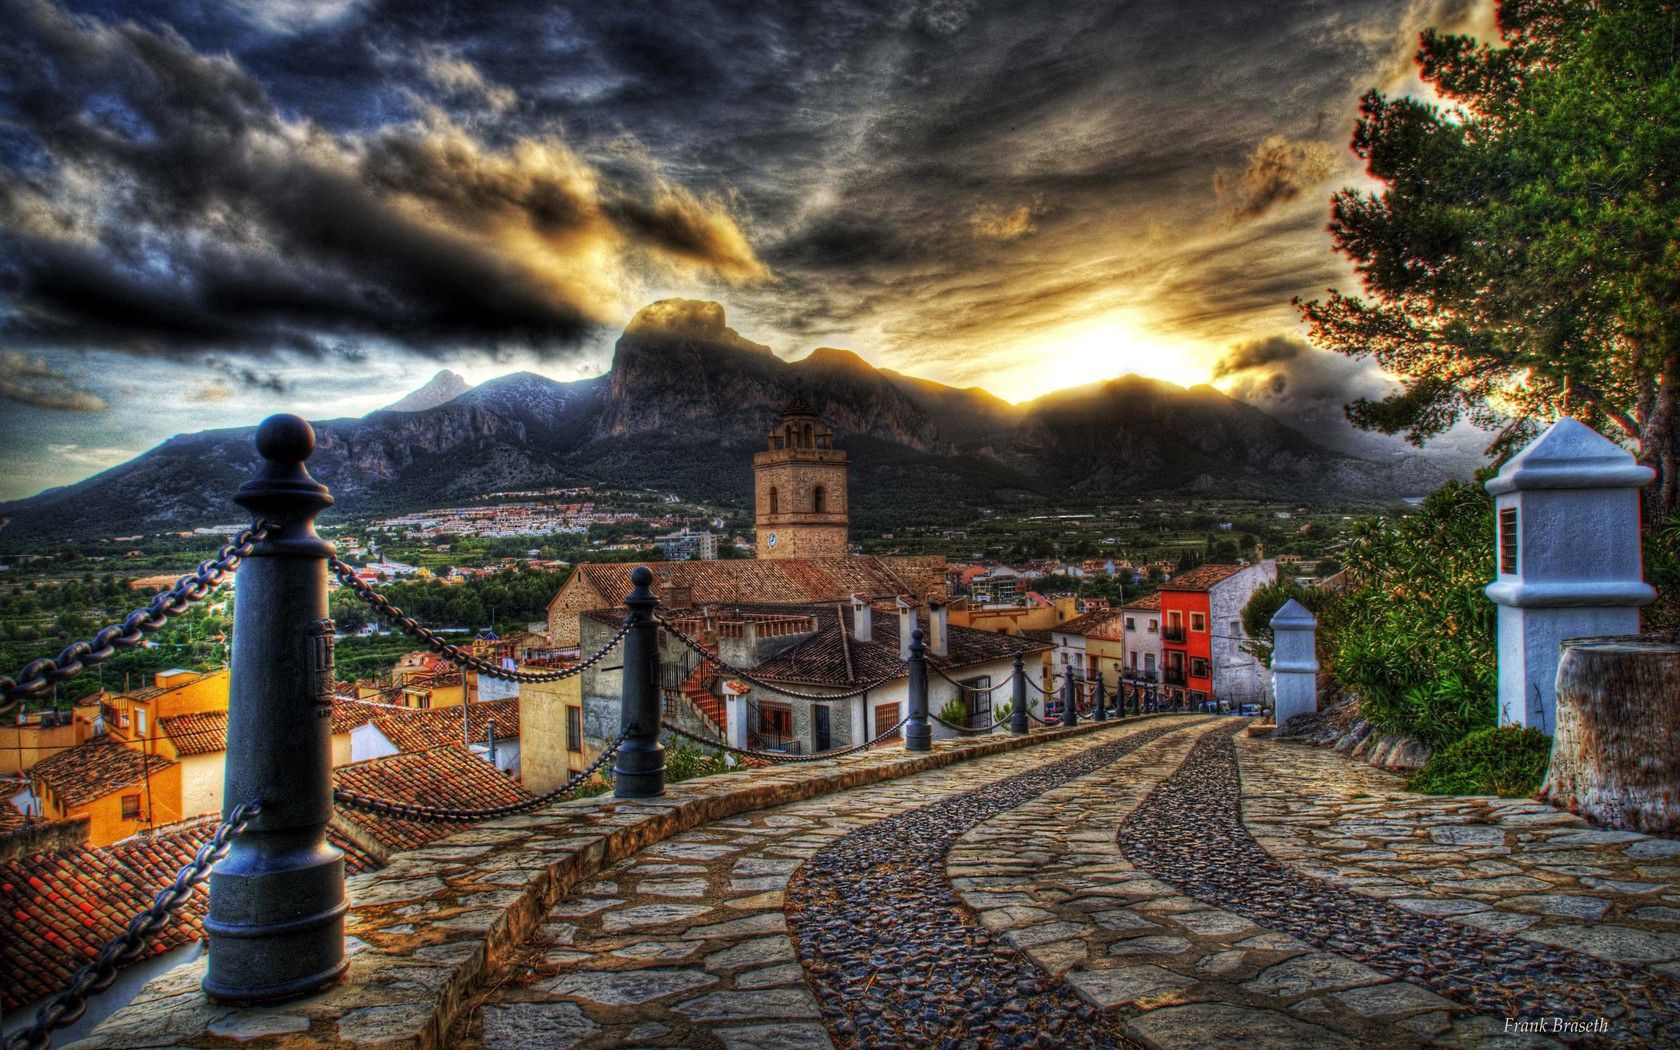 streets, sky, cities, flowers, houses, sunset, mountains, architecture, clouds, road, beautiful, old, colorful, hdr iphone wallpaper